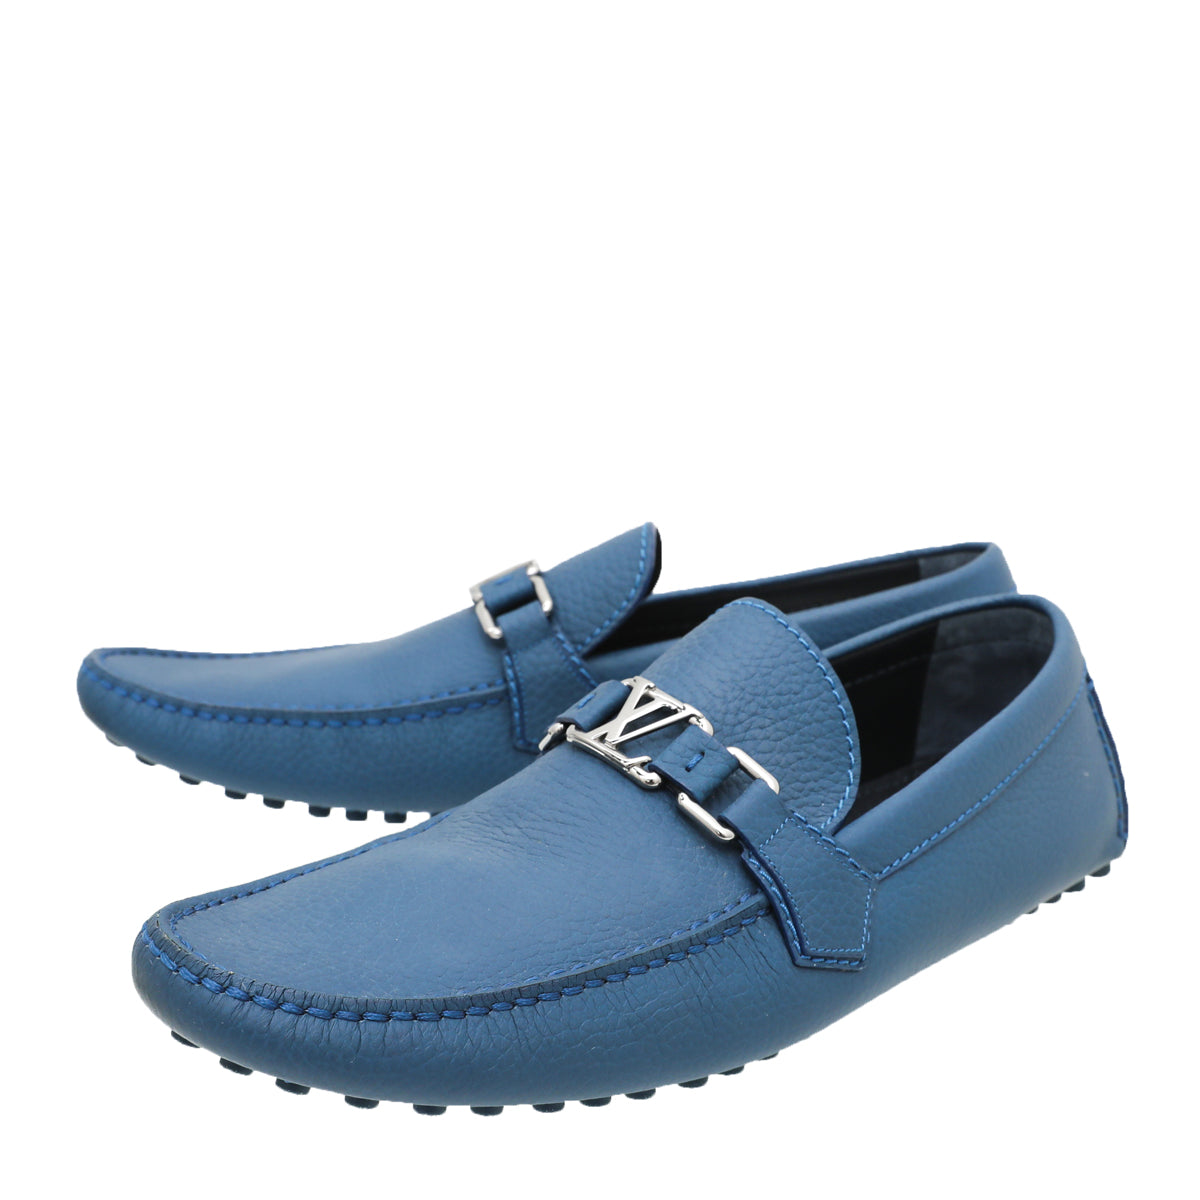 Vuitton Blue Monte Carlo Moccasin Loafers The Closet